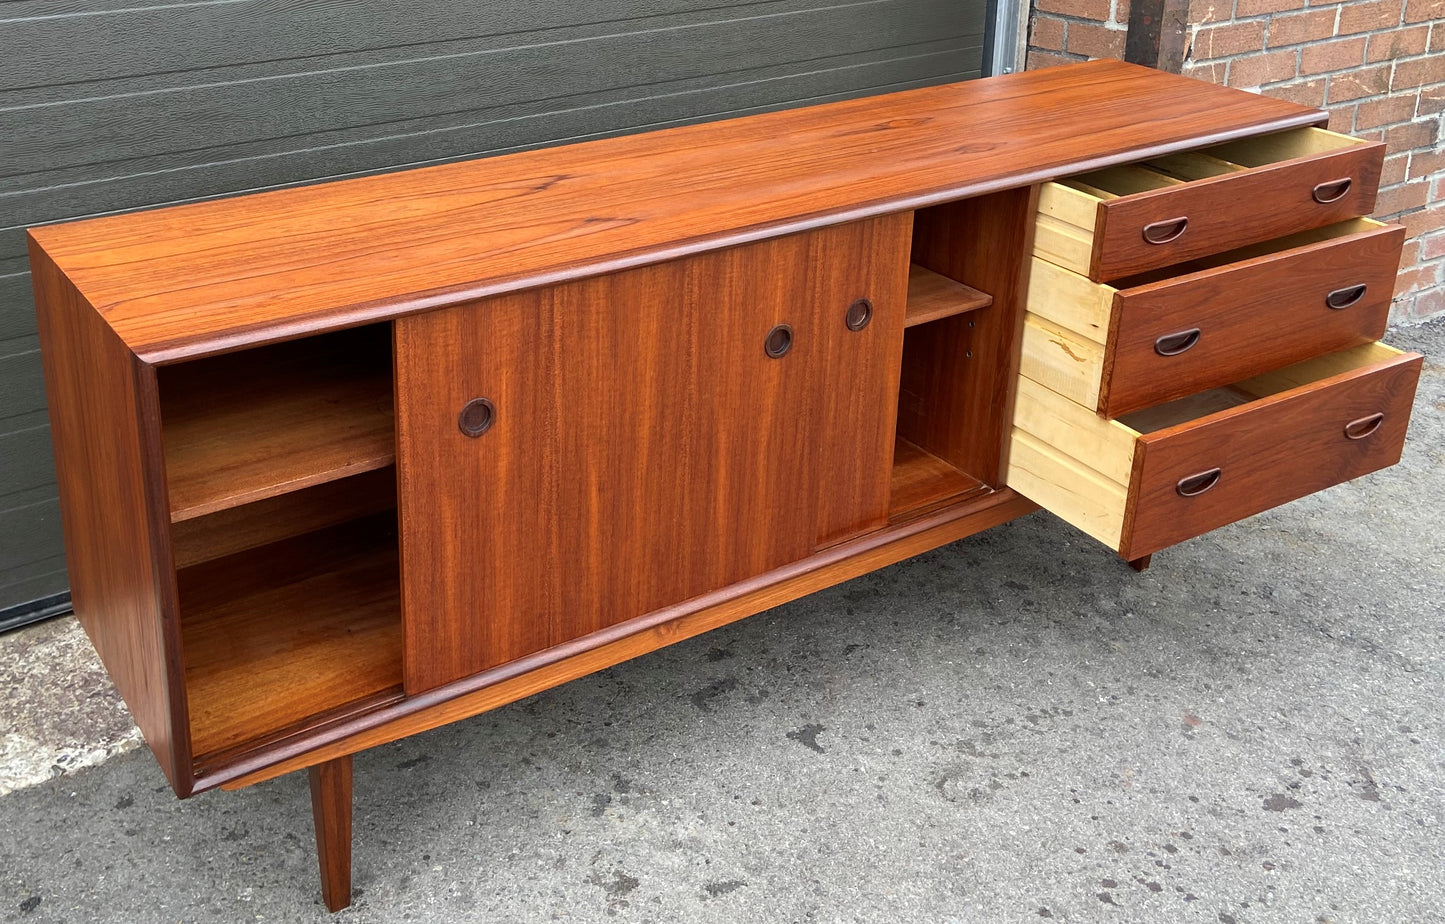 REFINISHED Mid Century Modern Teak Sideboard 6 ft, Perfect